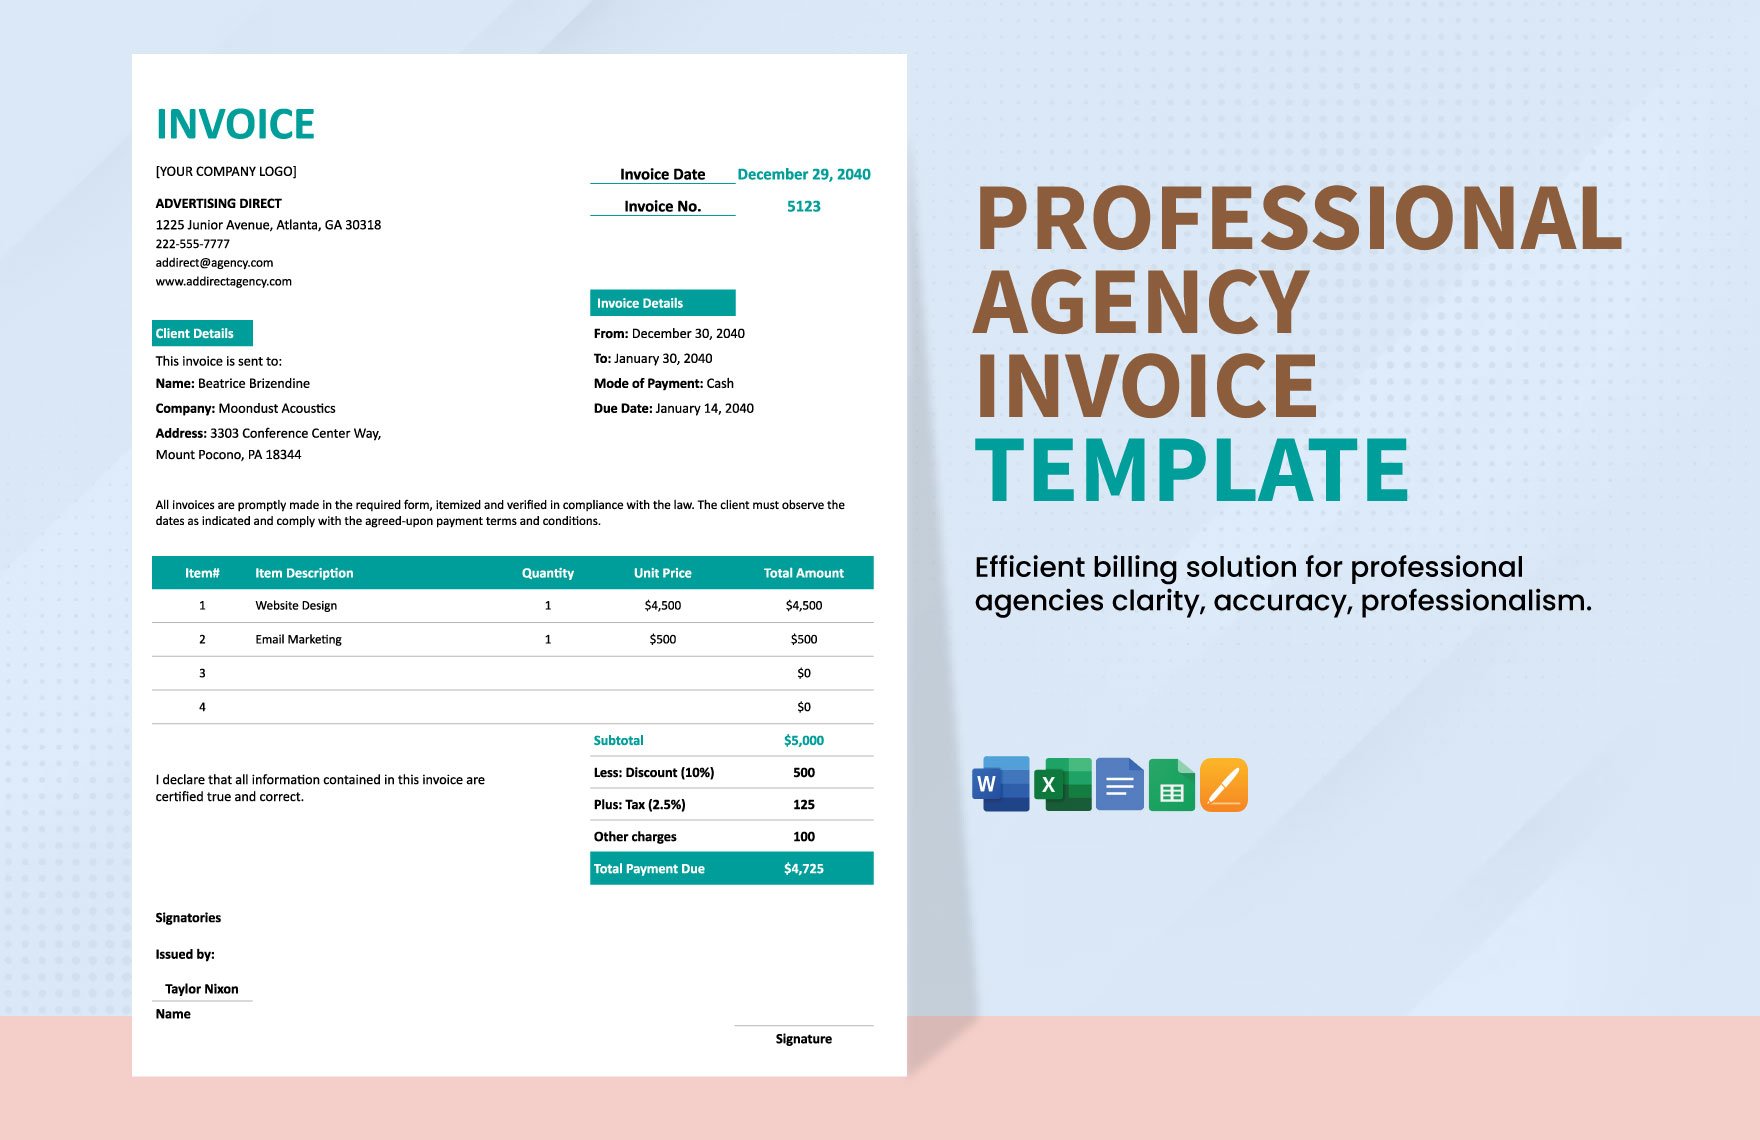 Professional Agency Invoice Template in Word, Google Docs, Excel, Google Sheets, Apple Pages